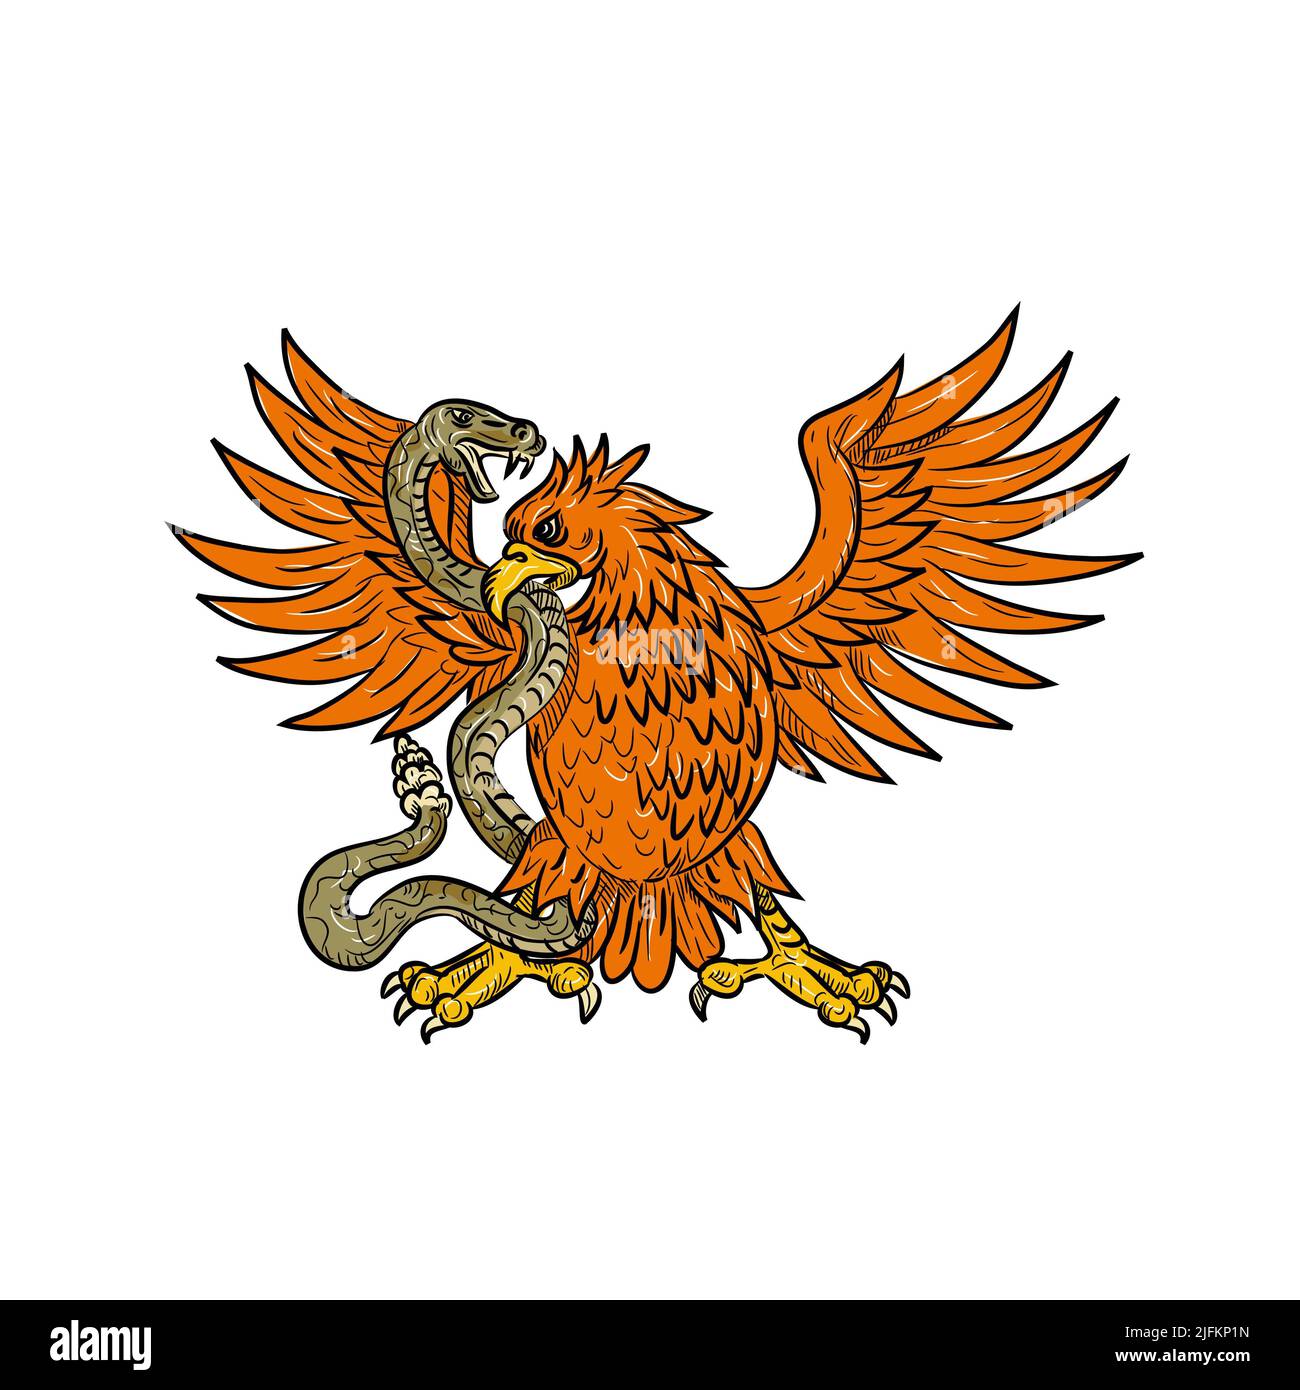 Drawing sketch style illustration of an American golden eagle, Mexican eagle or northern crested caracara grappling a rattlesnake, viper, snake or Stock Photo